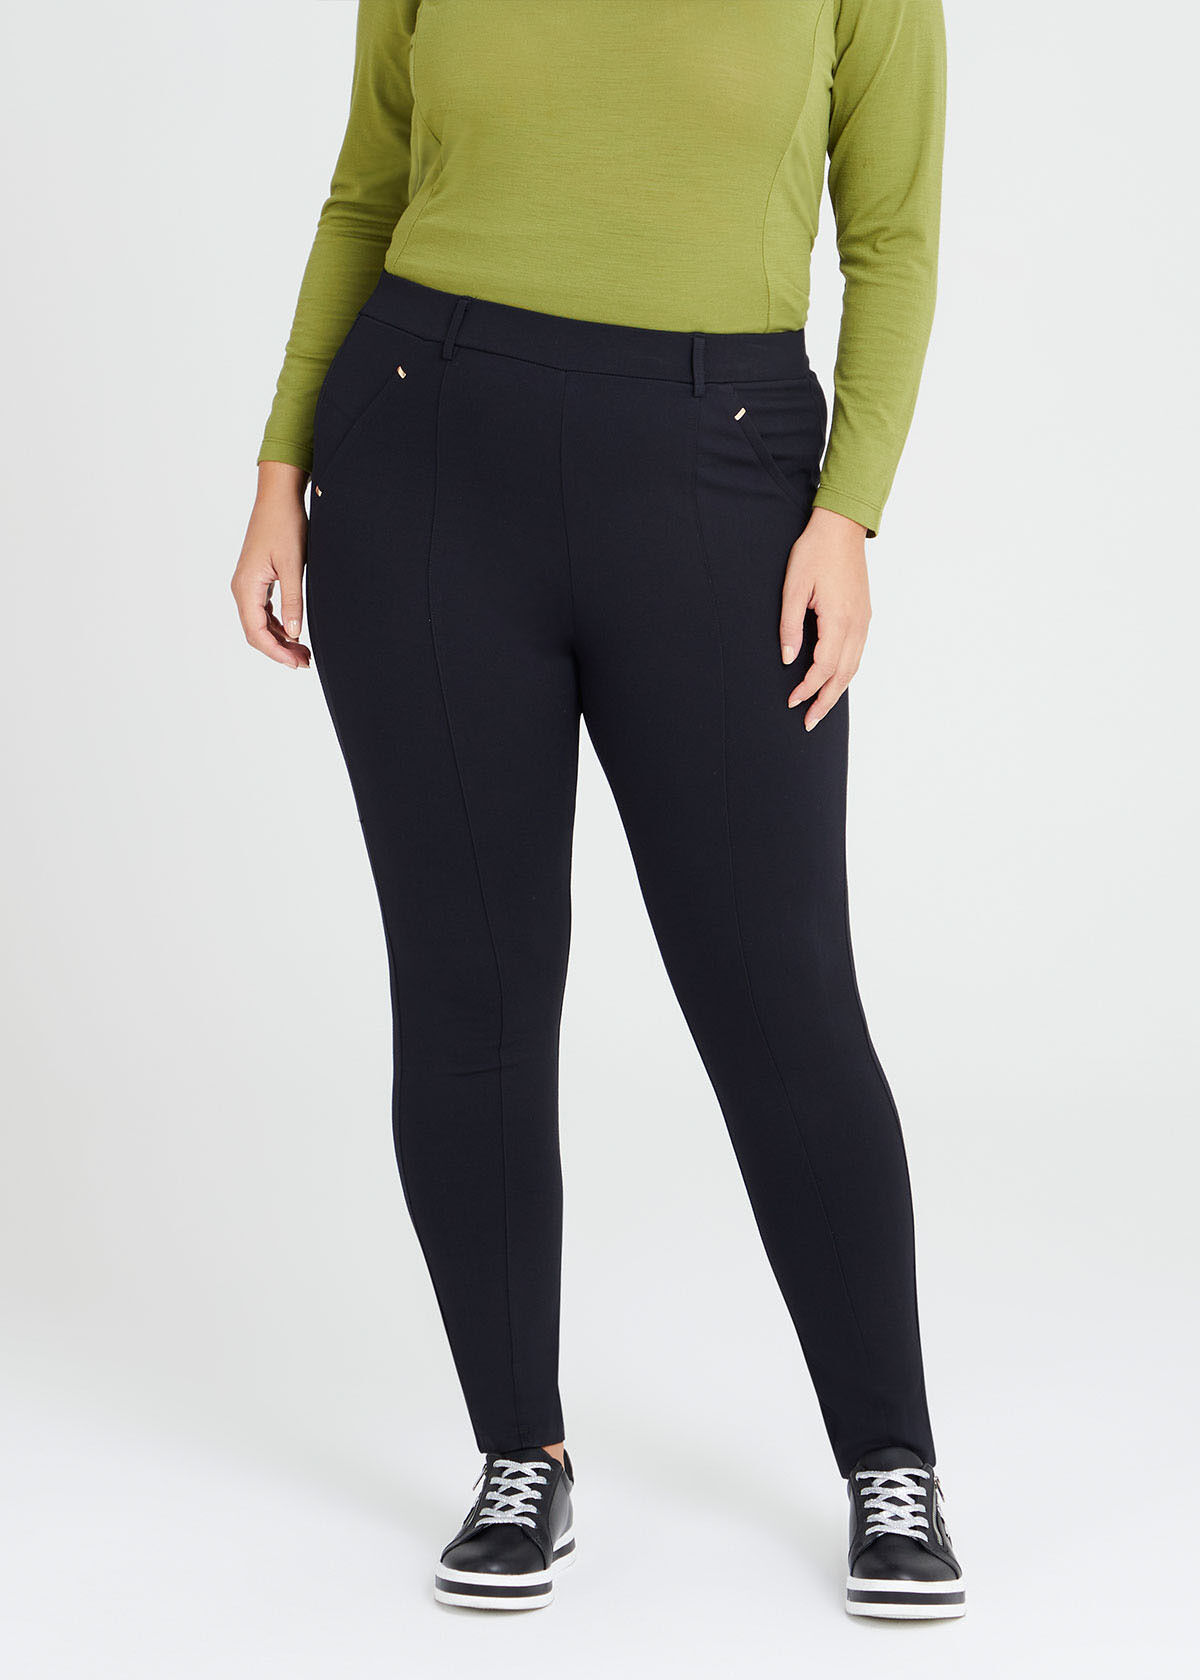 Stylish Plus Size Tall Leggings in Stretch Knit